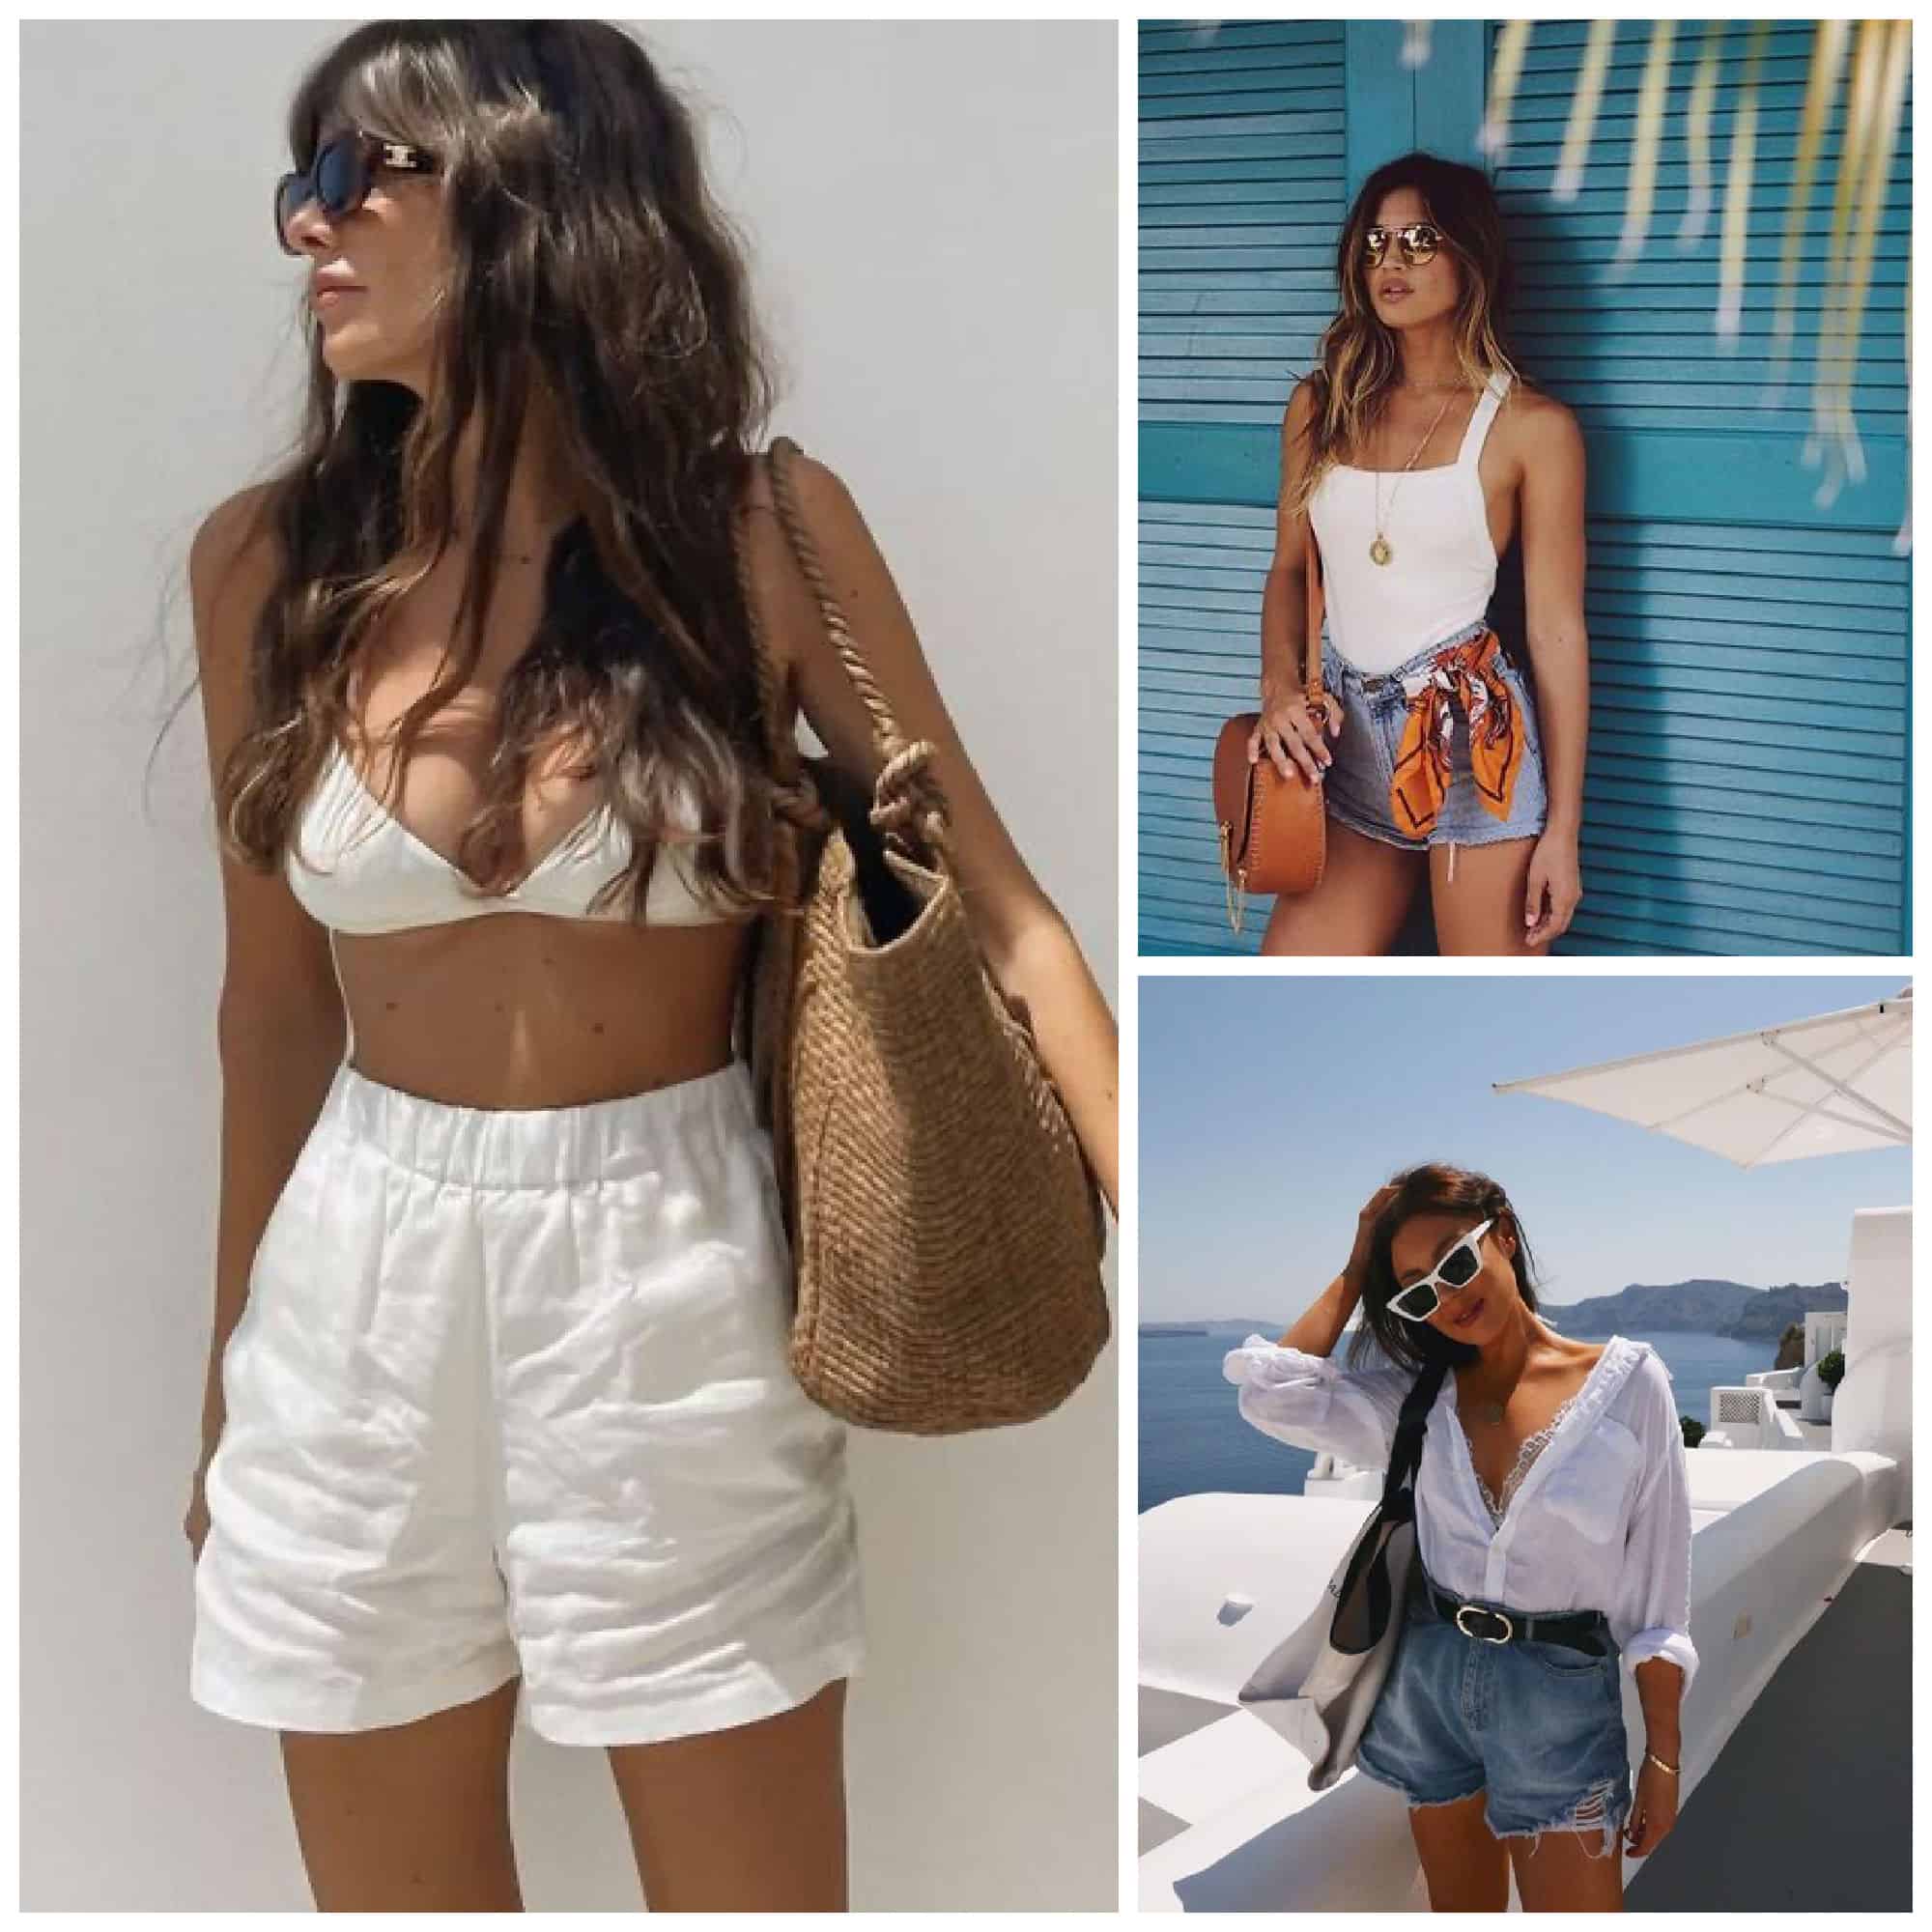 stylish beach outfit ideas to rock this summer 18